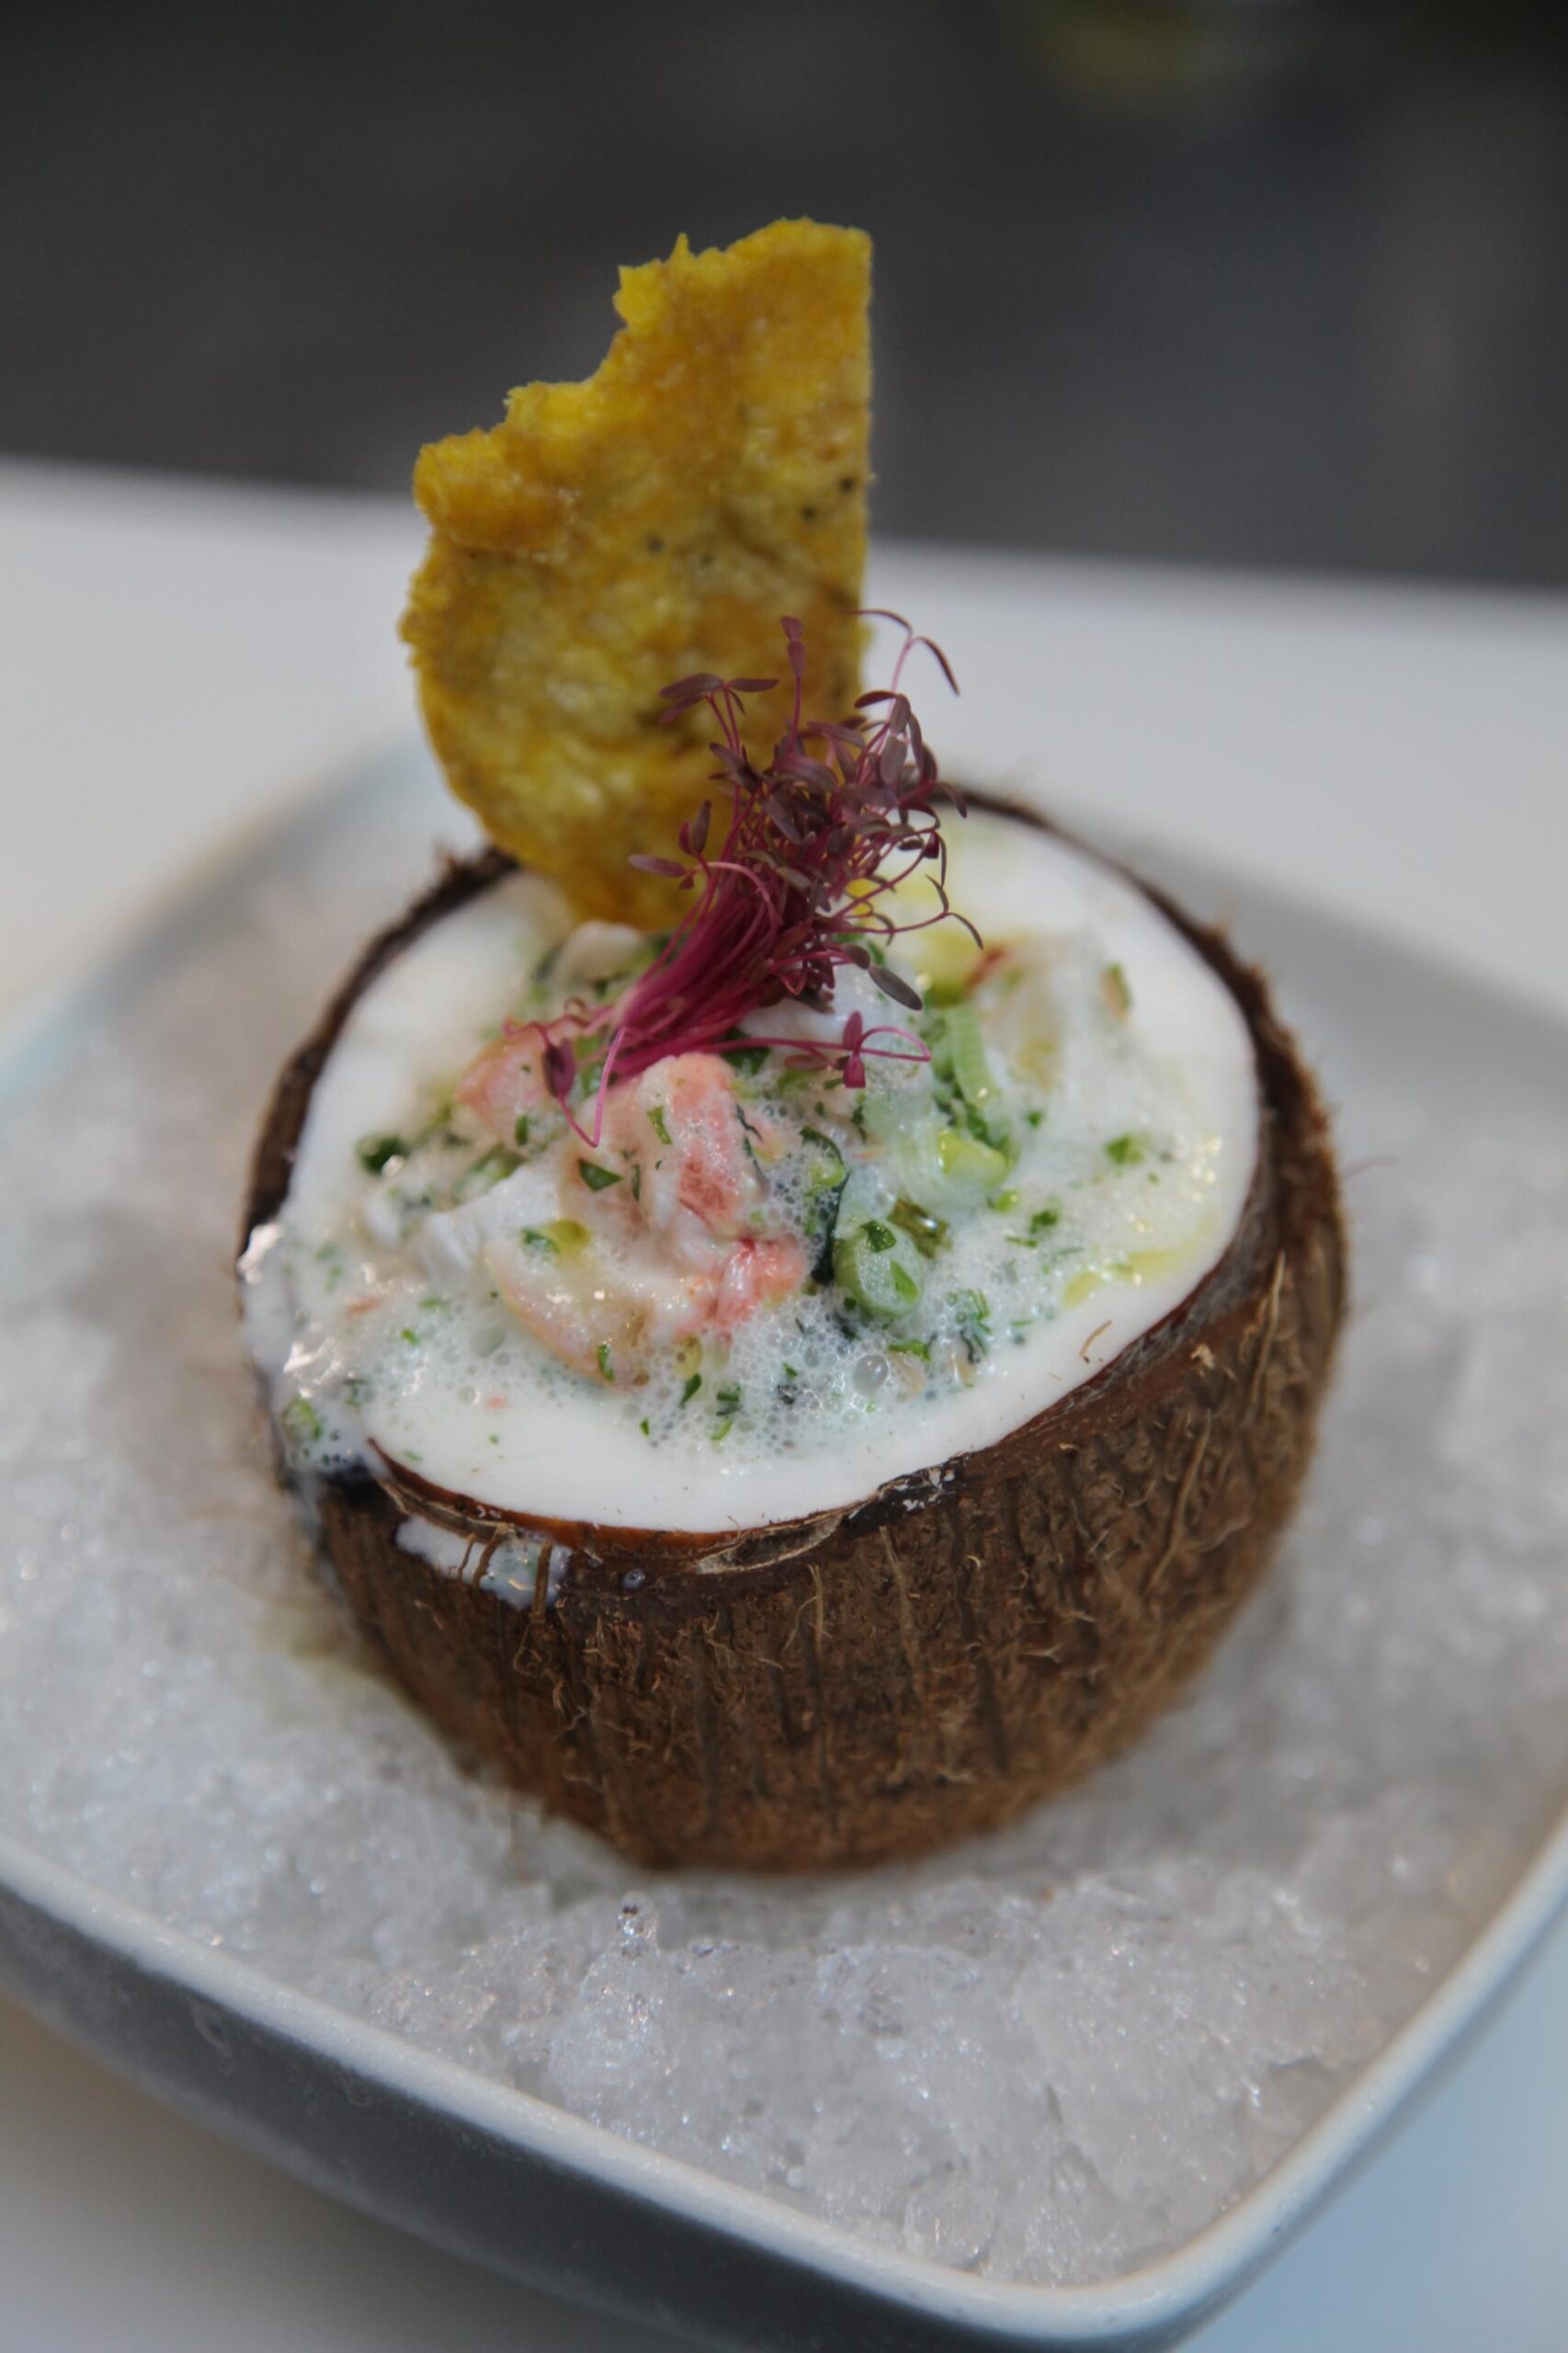  The vibrant colors and flavors of this Spiny Lobster Ceviche will take your taste buds on a trip to the tropics.